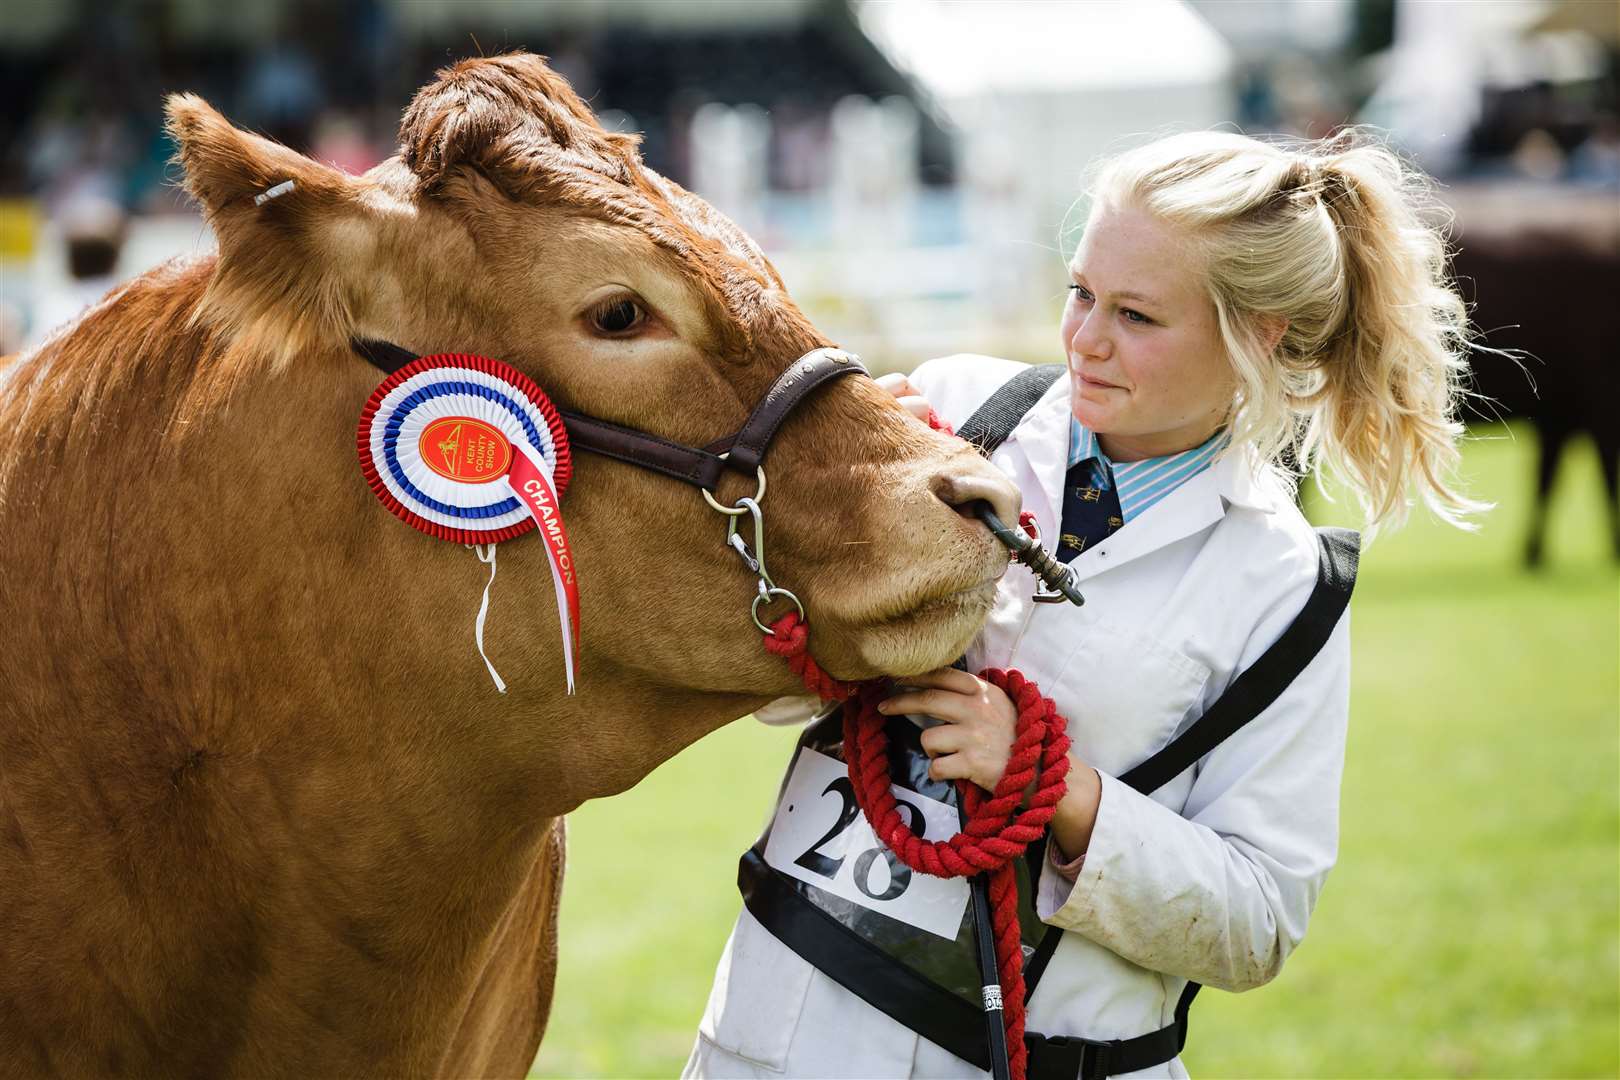 Celebrate farming and agriculture at the annual Kent County Show